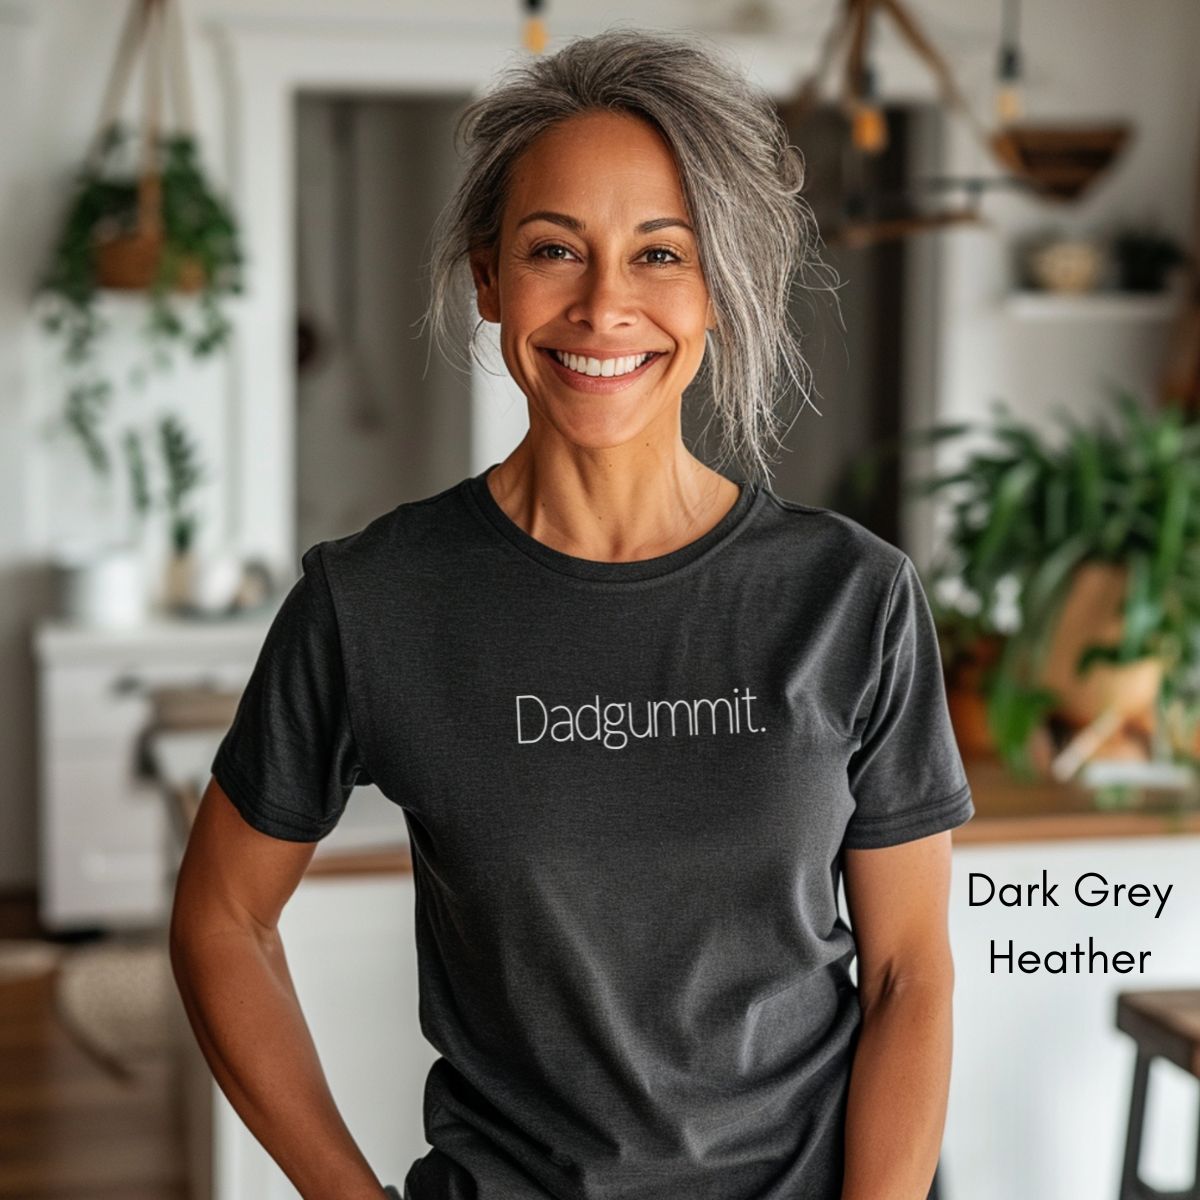 Dadgummit Tee | Unisex Jersey Short Sleeve Tee | Funny Southern Sayings Tee | Life in the South Tee